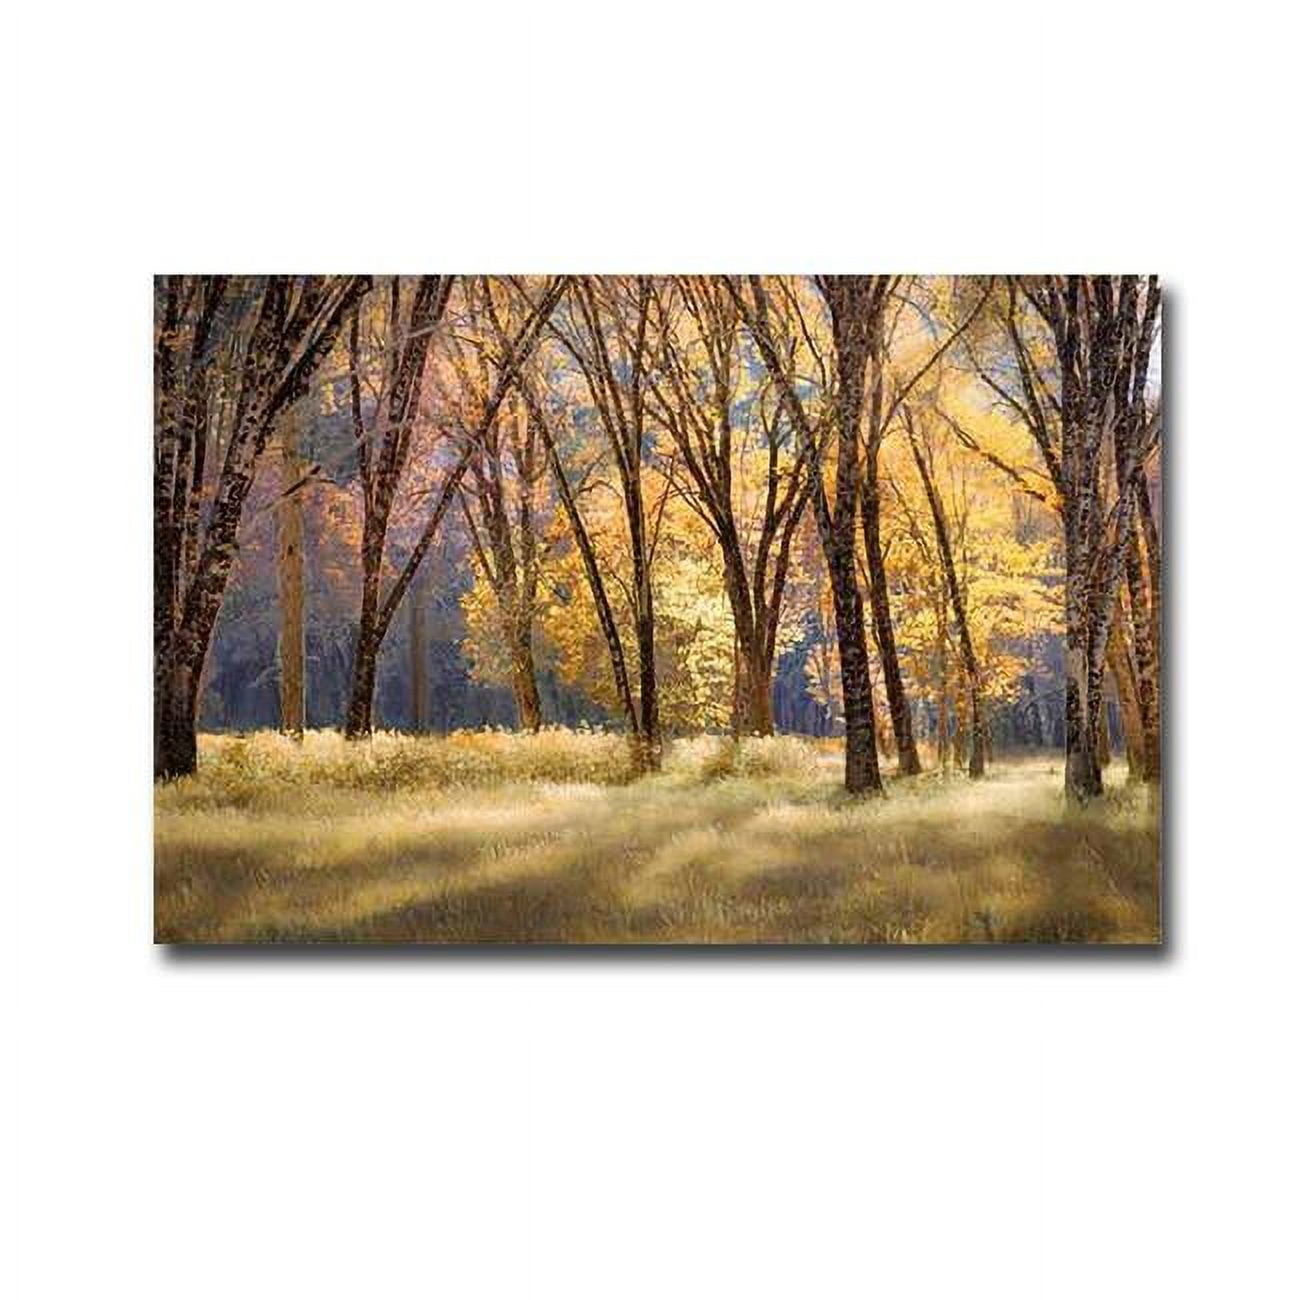 El Capitan Meadow By Fred Mertz Premium Gallery-wrapped Canvas Giclee Art - Ready-to-hang, 12 X 18 X 1.5 In.